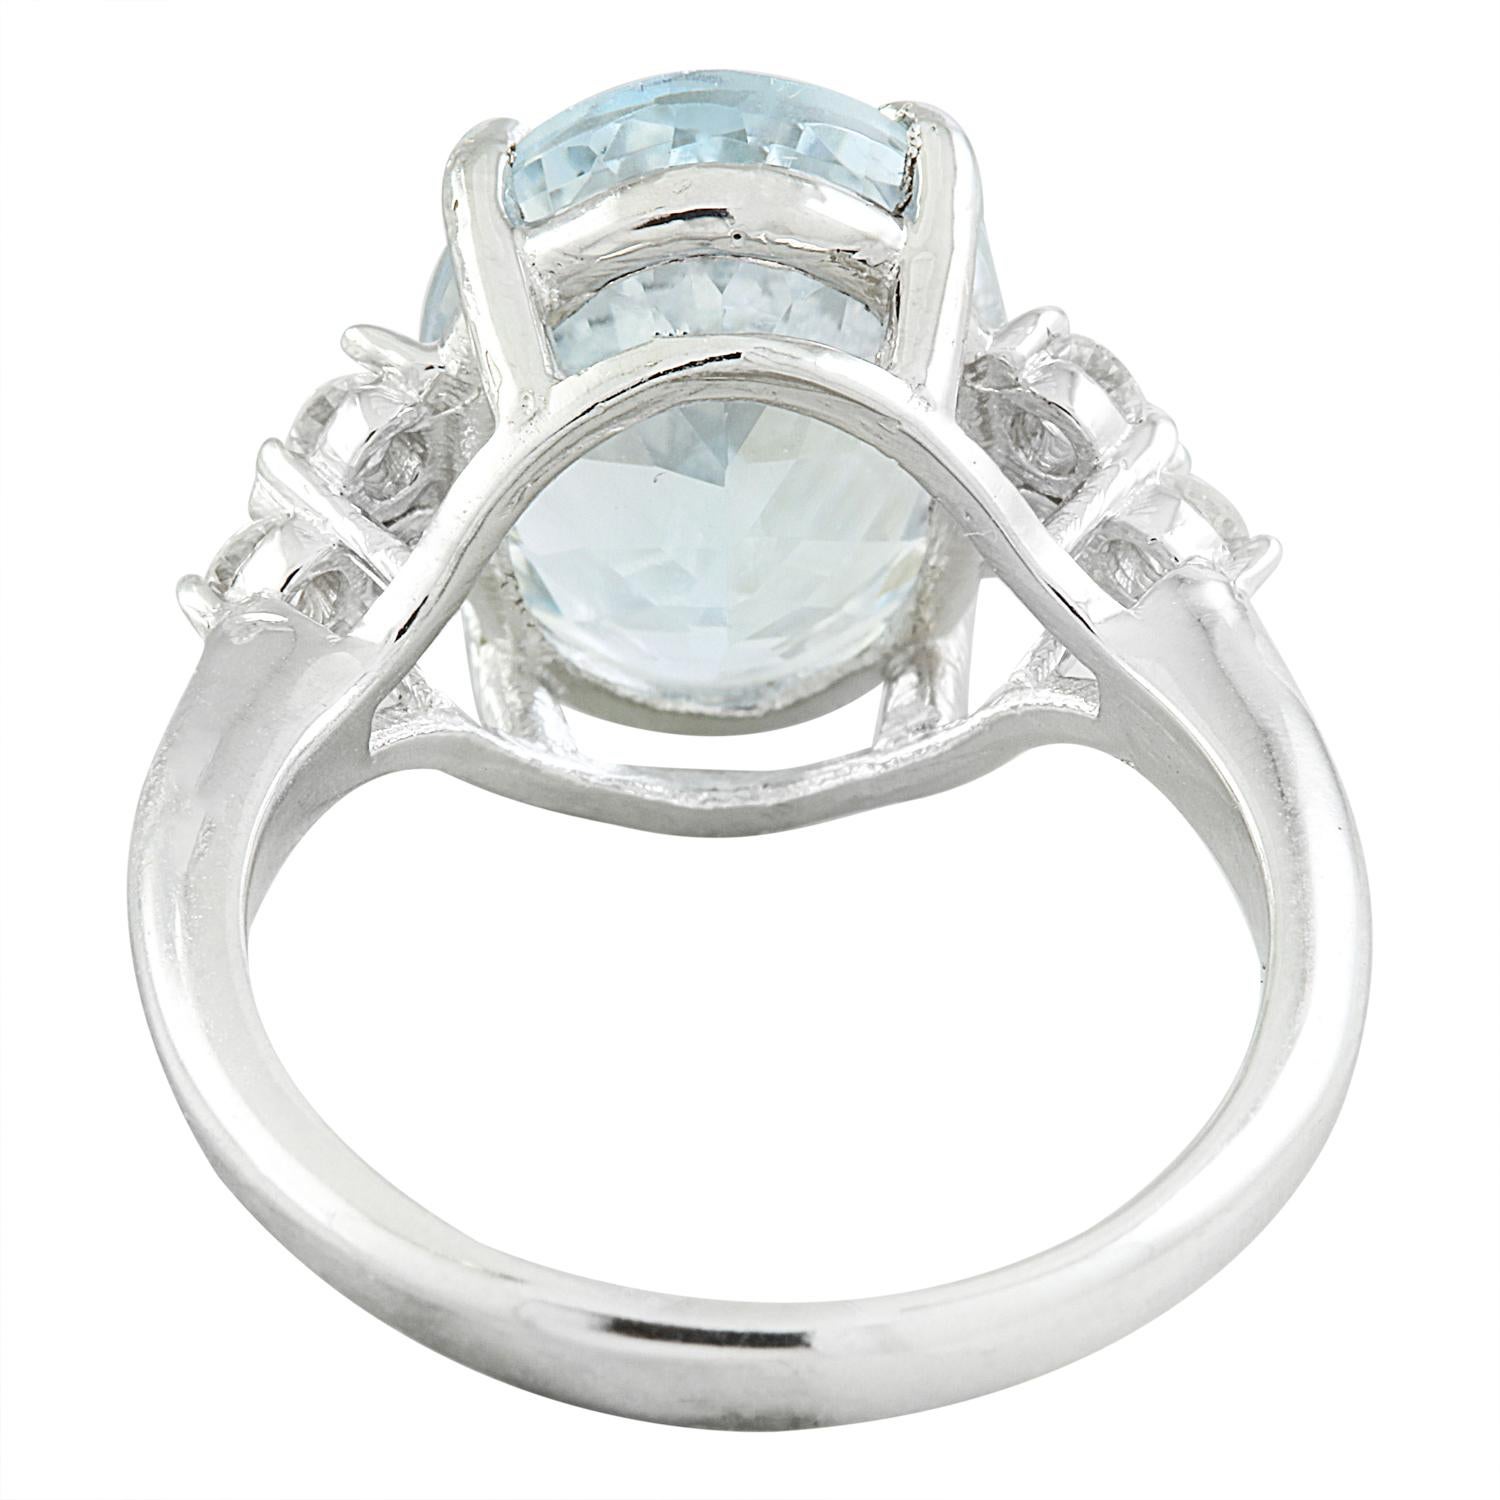 Oval Cut Dazzling Aquamarine Diamond Ring: Exquisite Beauty in 14K Solid White Gold For Sale